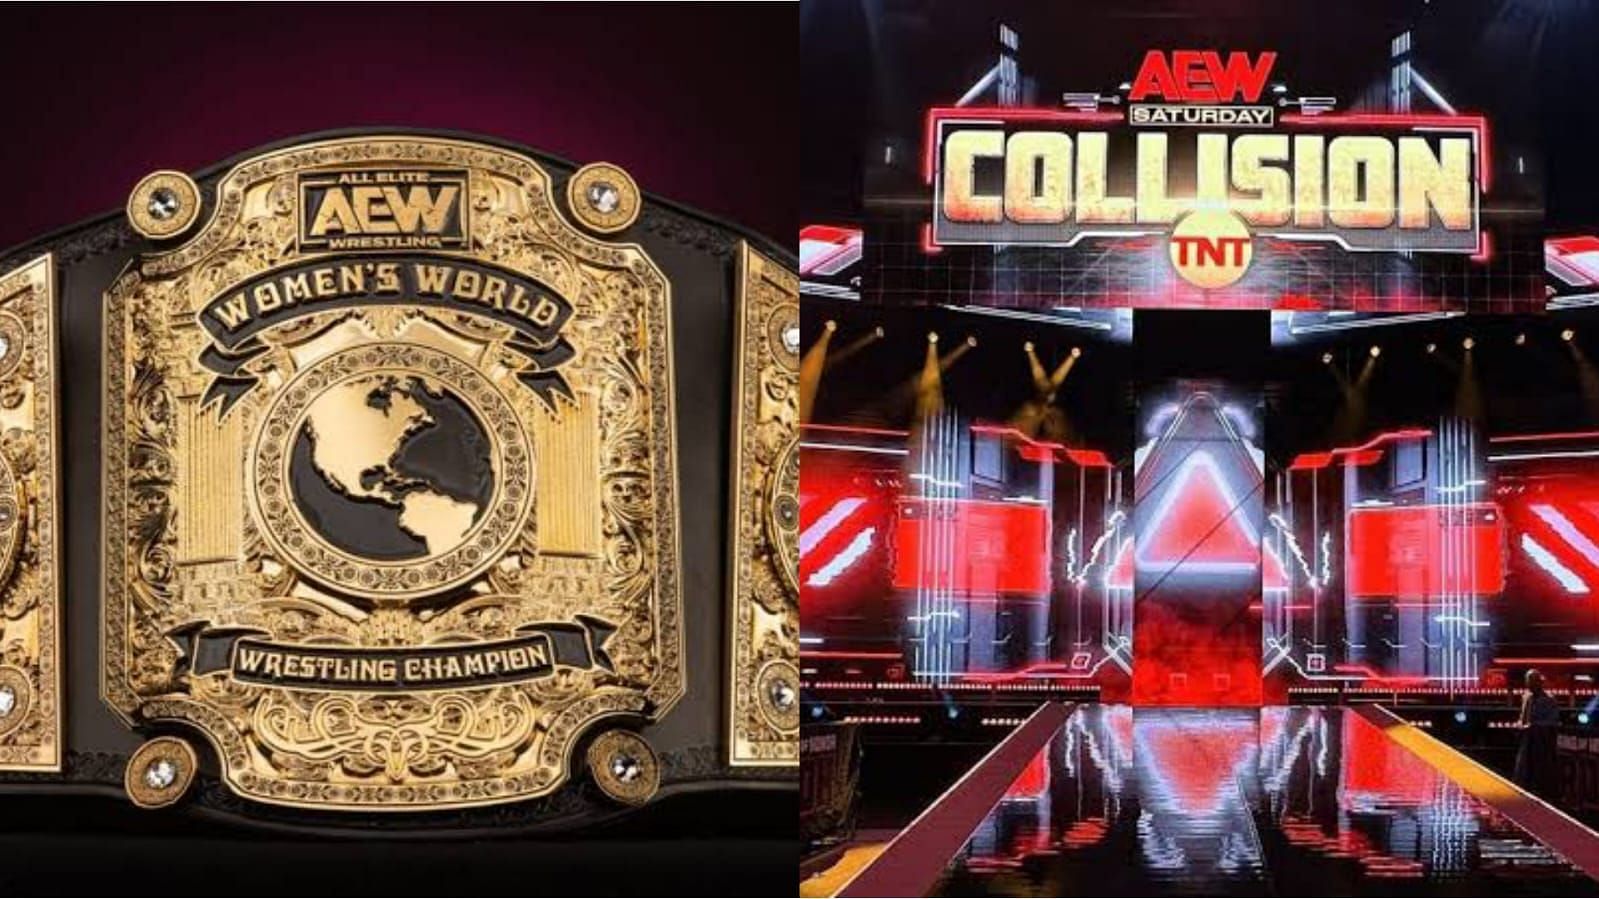 A returning AEW star wrestled her first Collision match